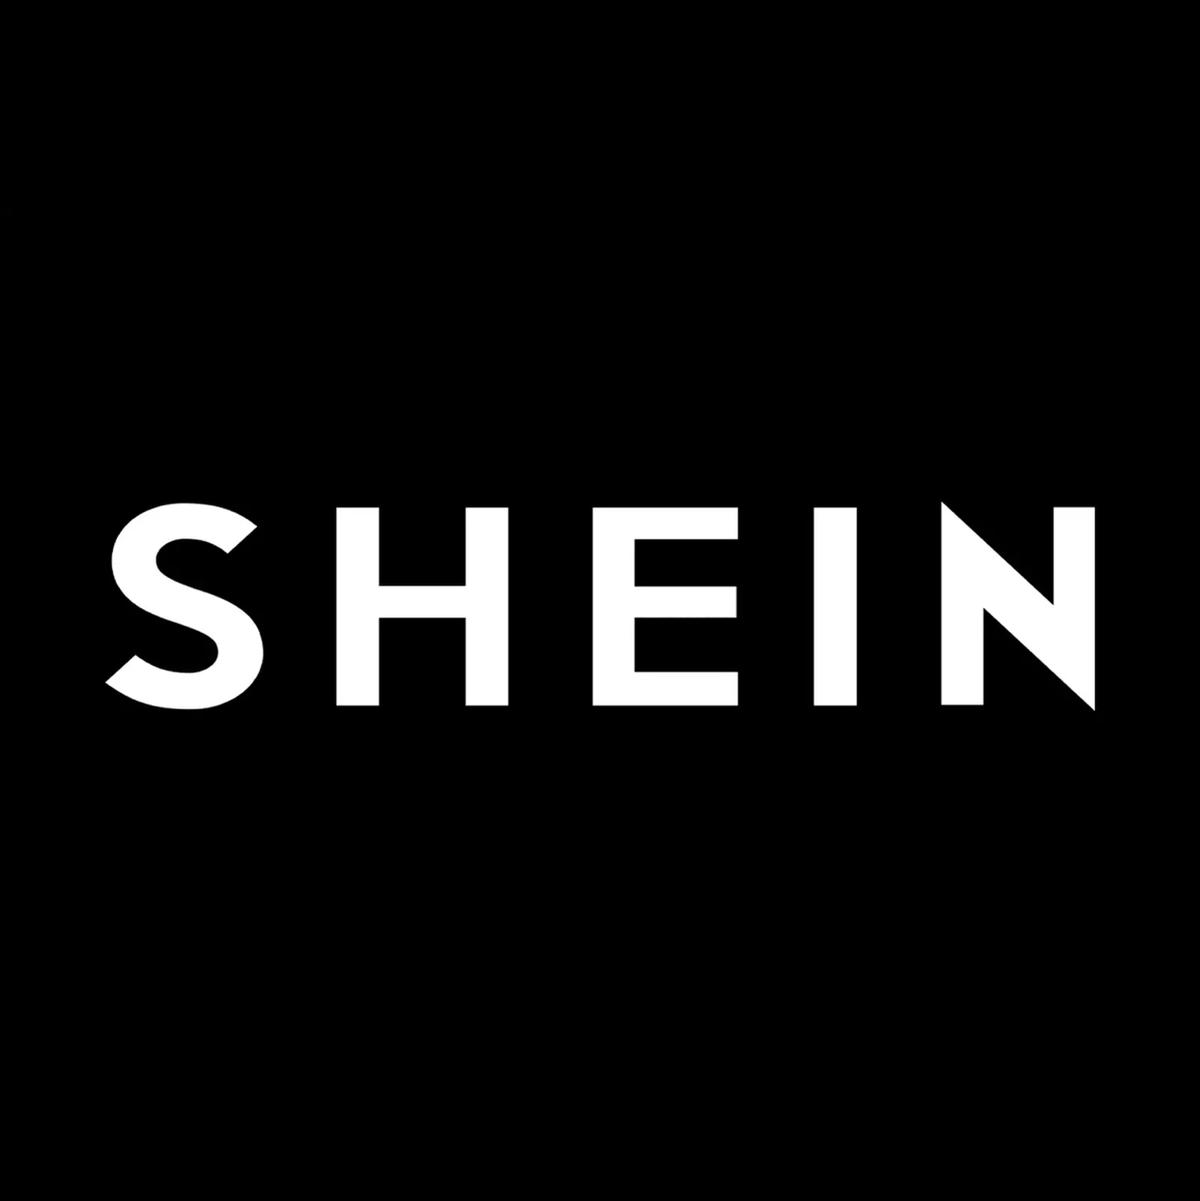 SHEIN's images